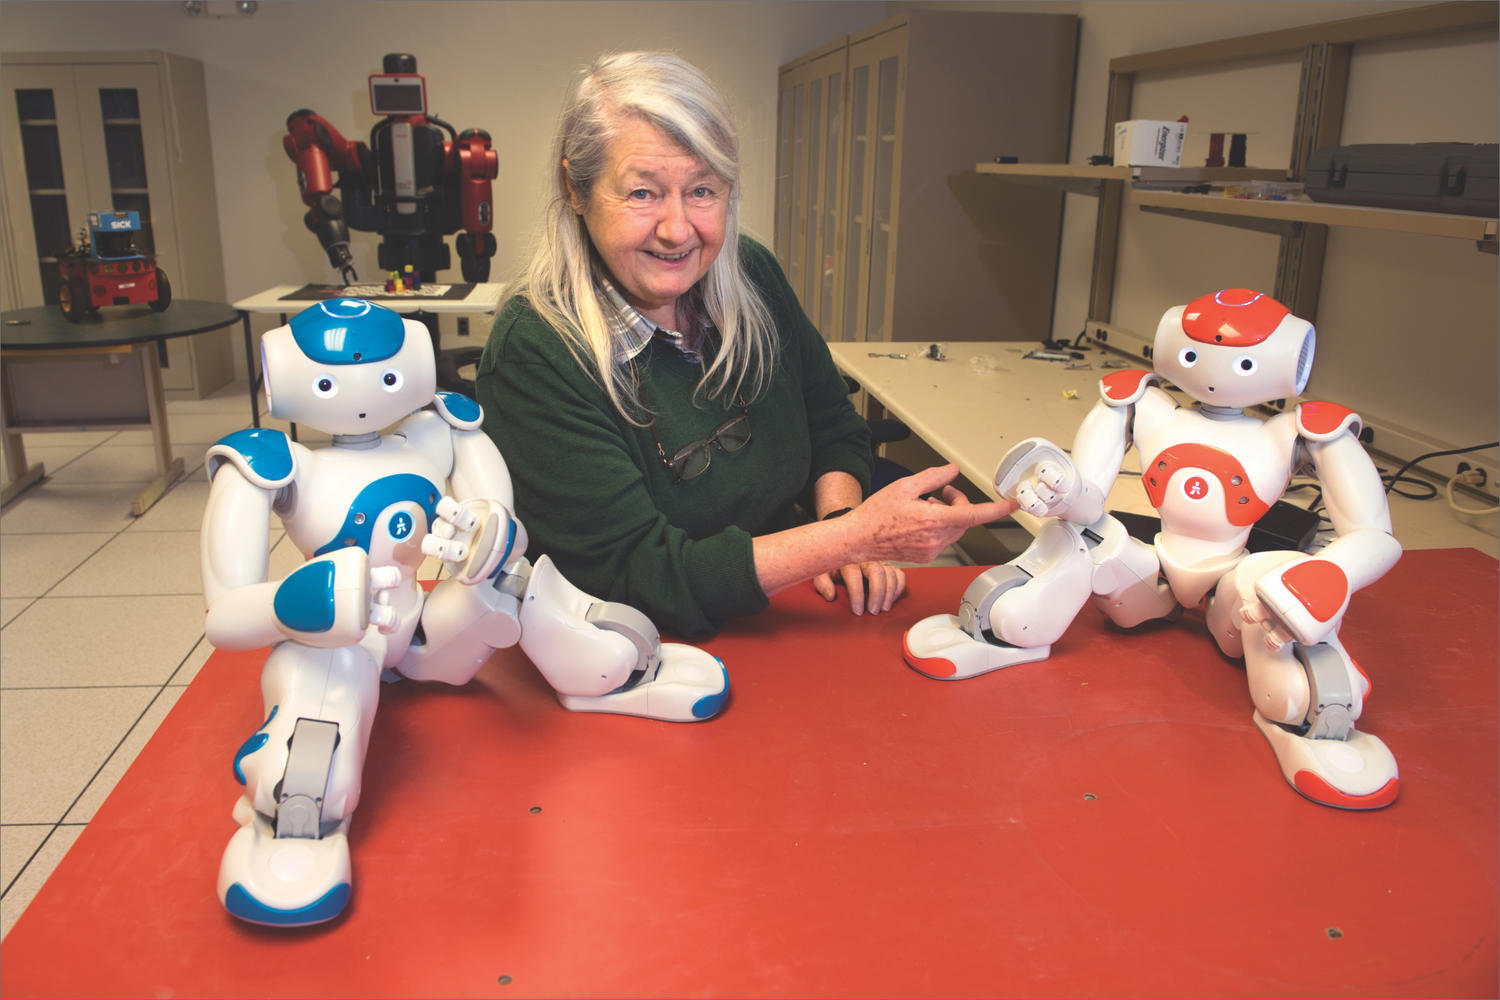 Maria Gini with two robots